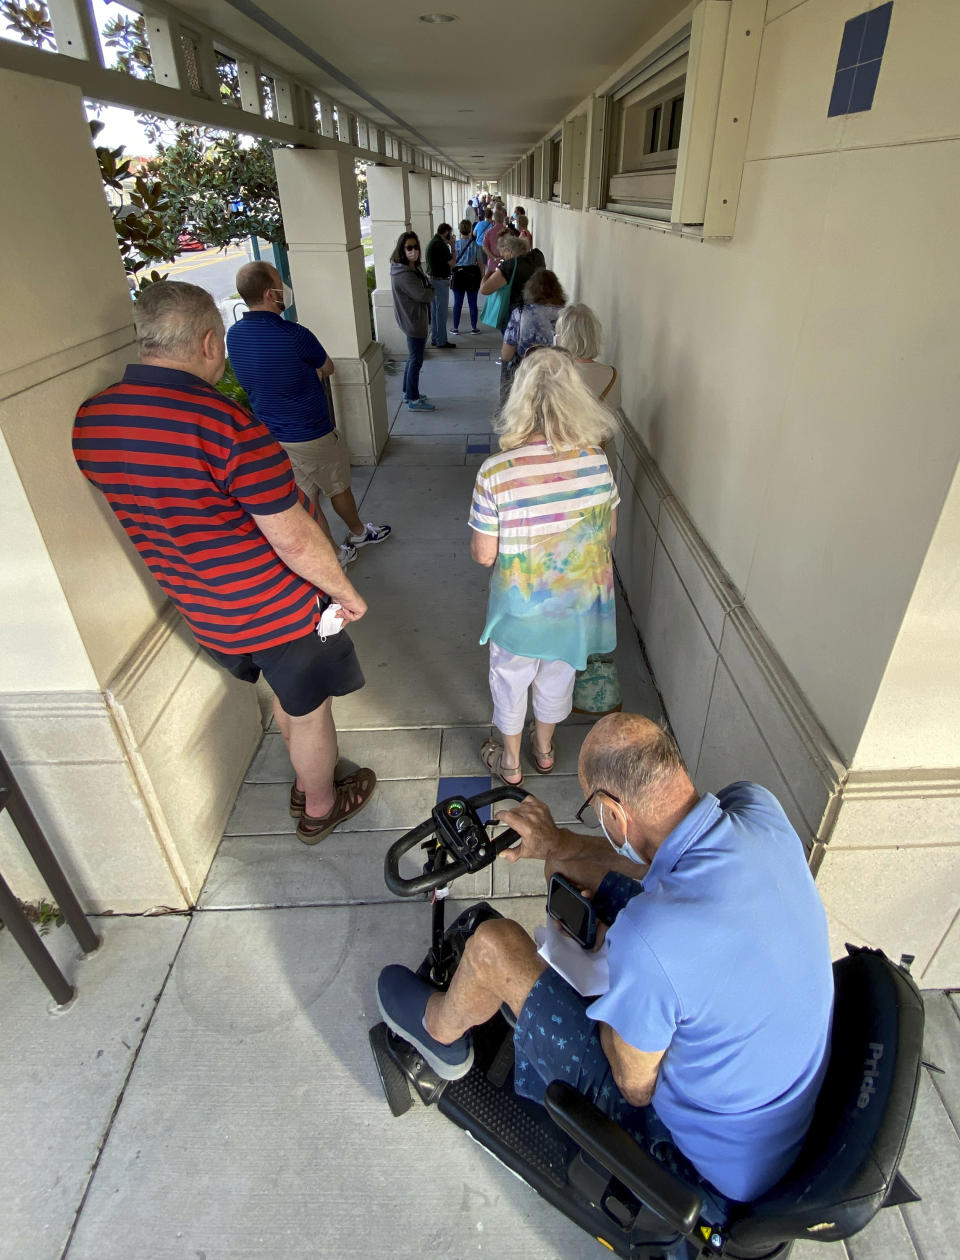 People wait in a line in Sarasota, Fla., Thursday morning, Dec. 31, 2020, as COVID-19 vaccinations were made available to those over 65 and high-risk frontline health care workers. (Tom Stathis via AP)